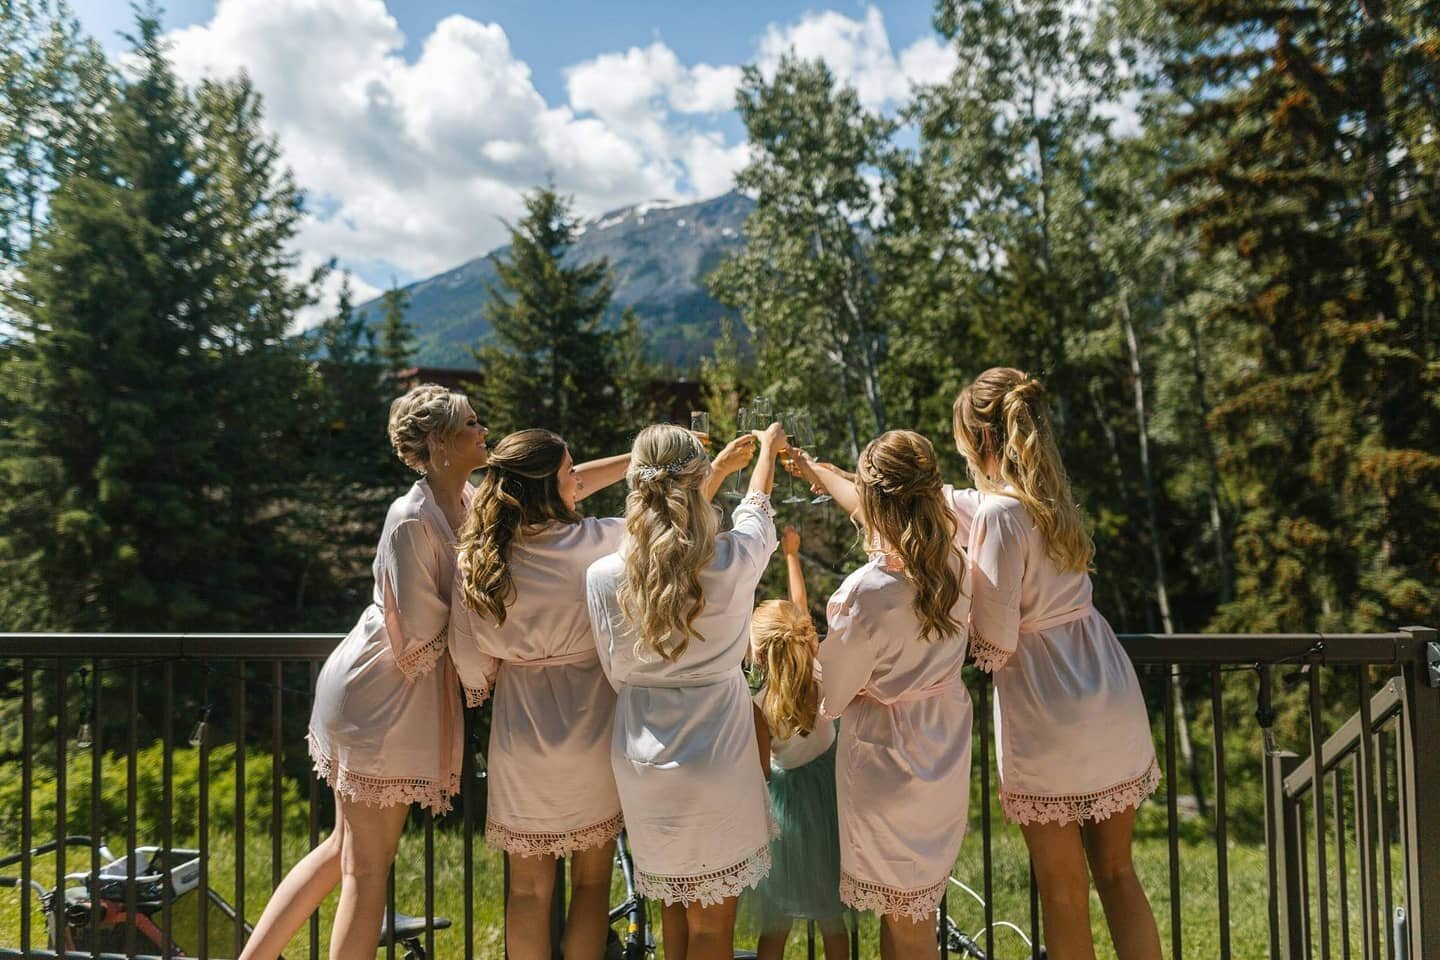 How do brides spend the morning of their wedding? Of course it varies from wedding to wedding, but in our experience it's all about the mimosas, laughs, some tears, and getting ready!

Here are 5 things brides can do the morning of their wedding. 

1